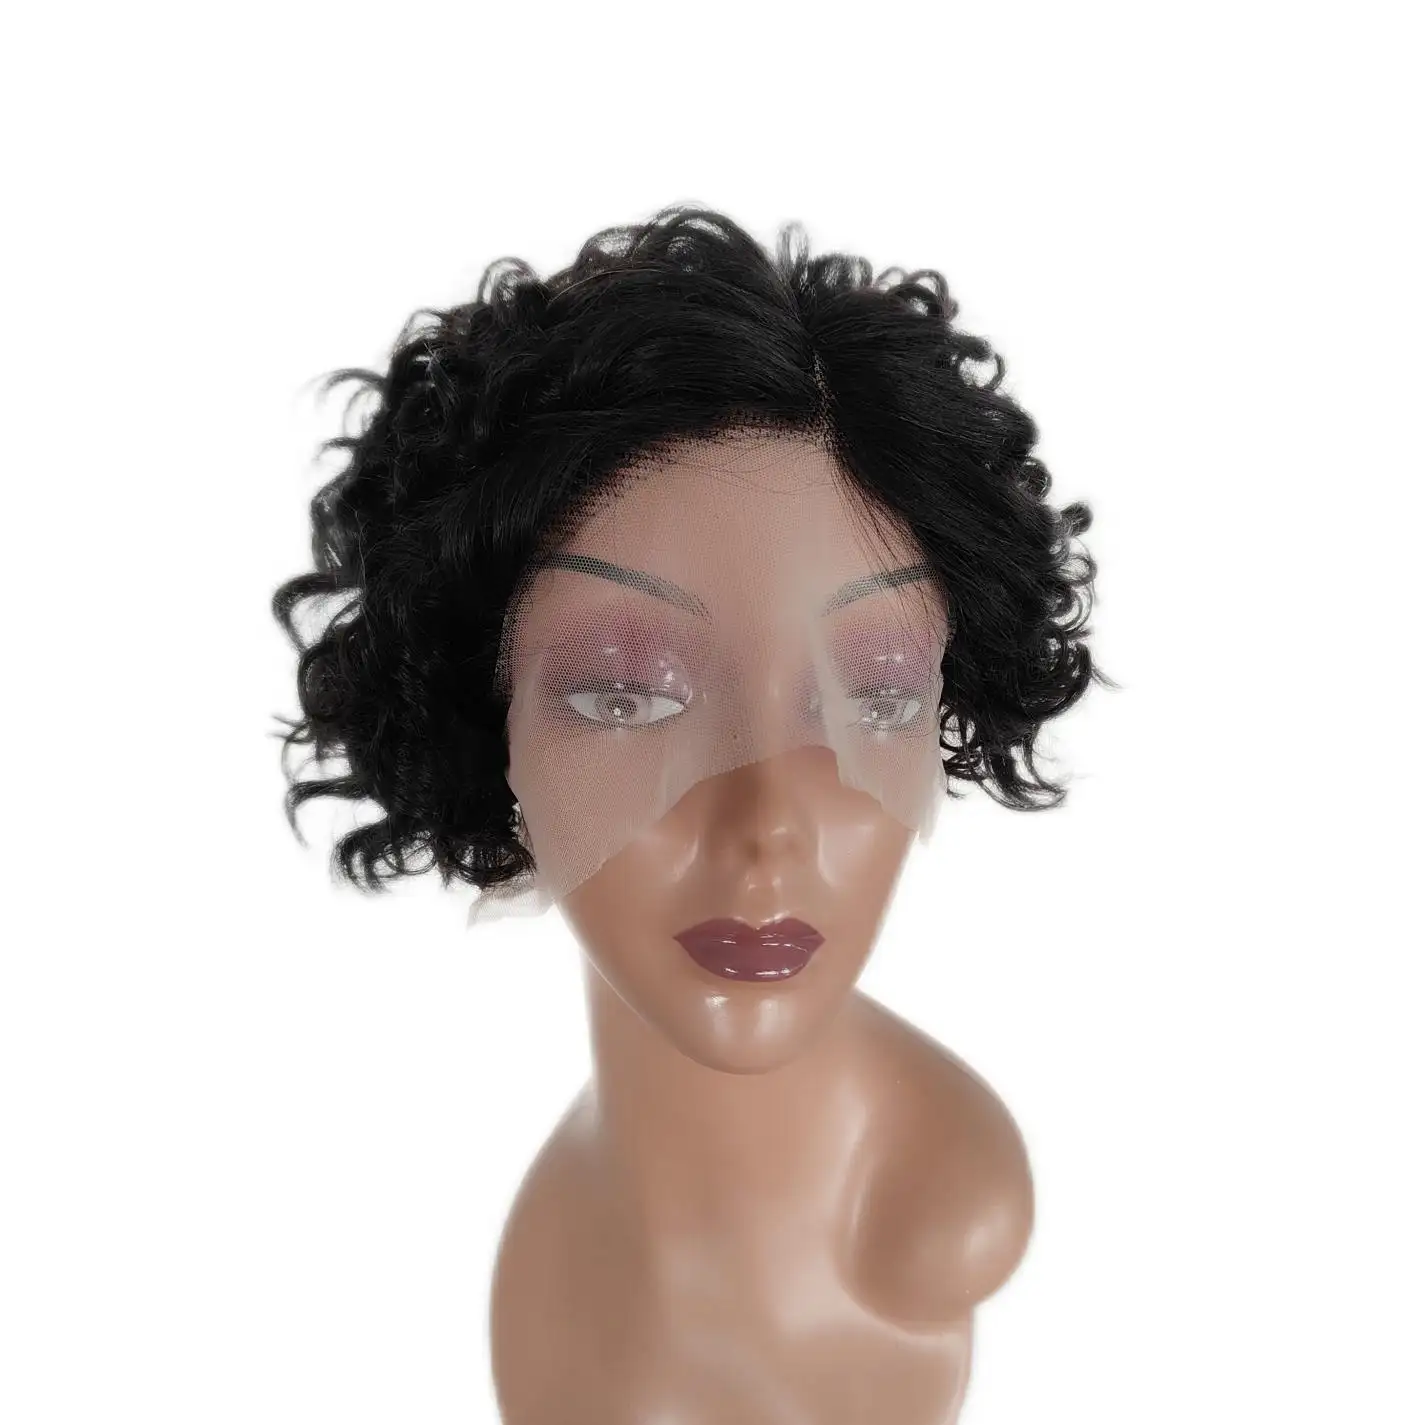 Cheap short pixie curly wig real human hair frontal curly wigs for black women human wig